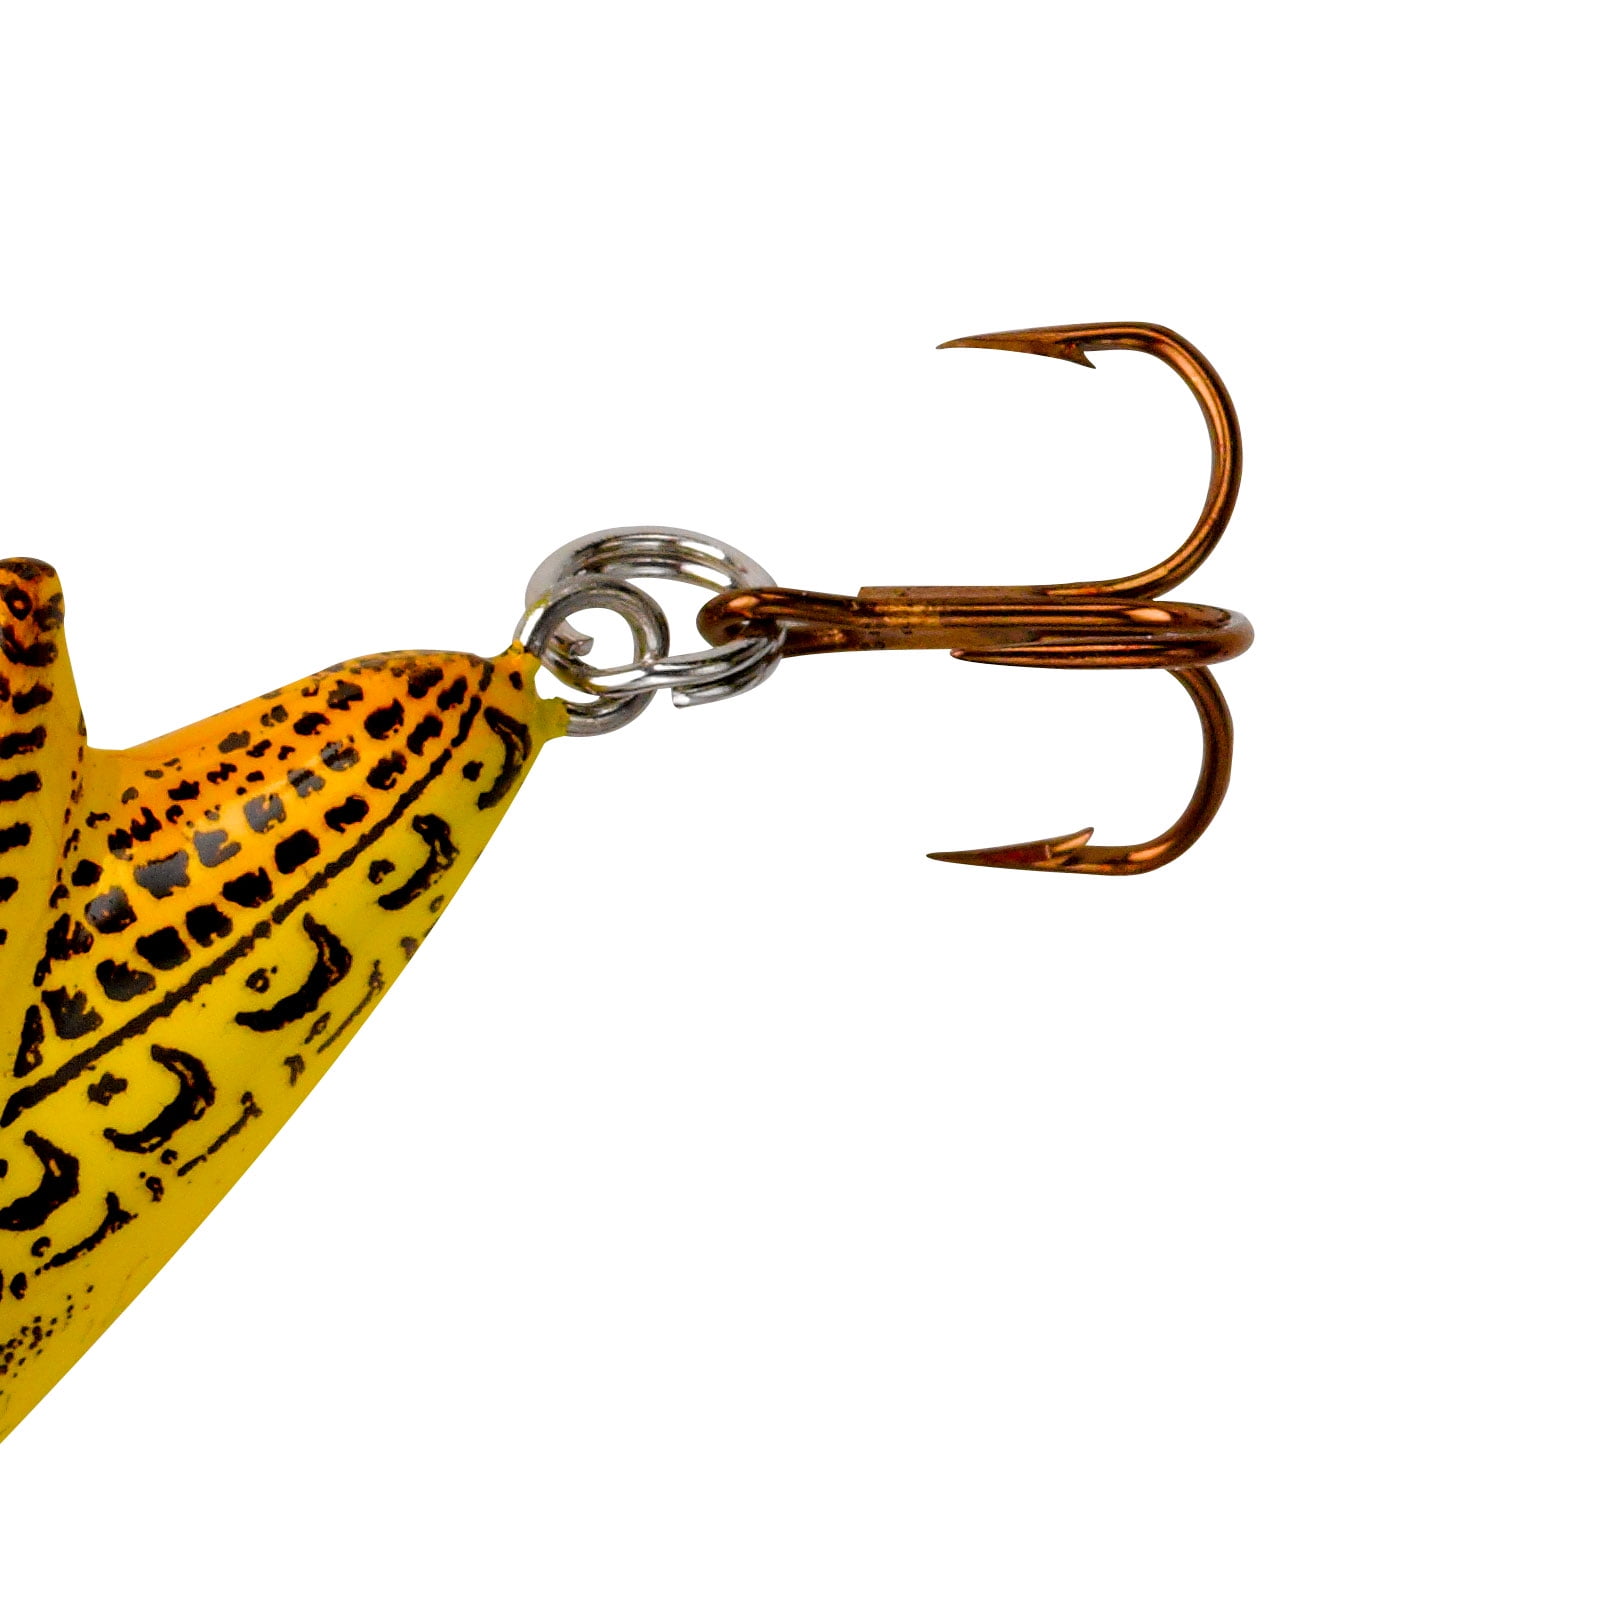  Rebel F73M95 Big Hopper, 1 3/4 1/4 oz, Brown Cricket :  Fishing Topwater Lures And Crankbaits : Sports & Outdoors